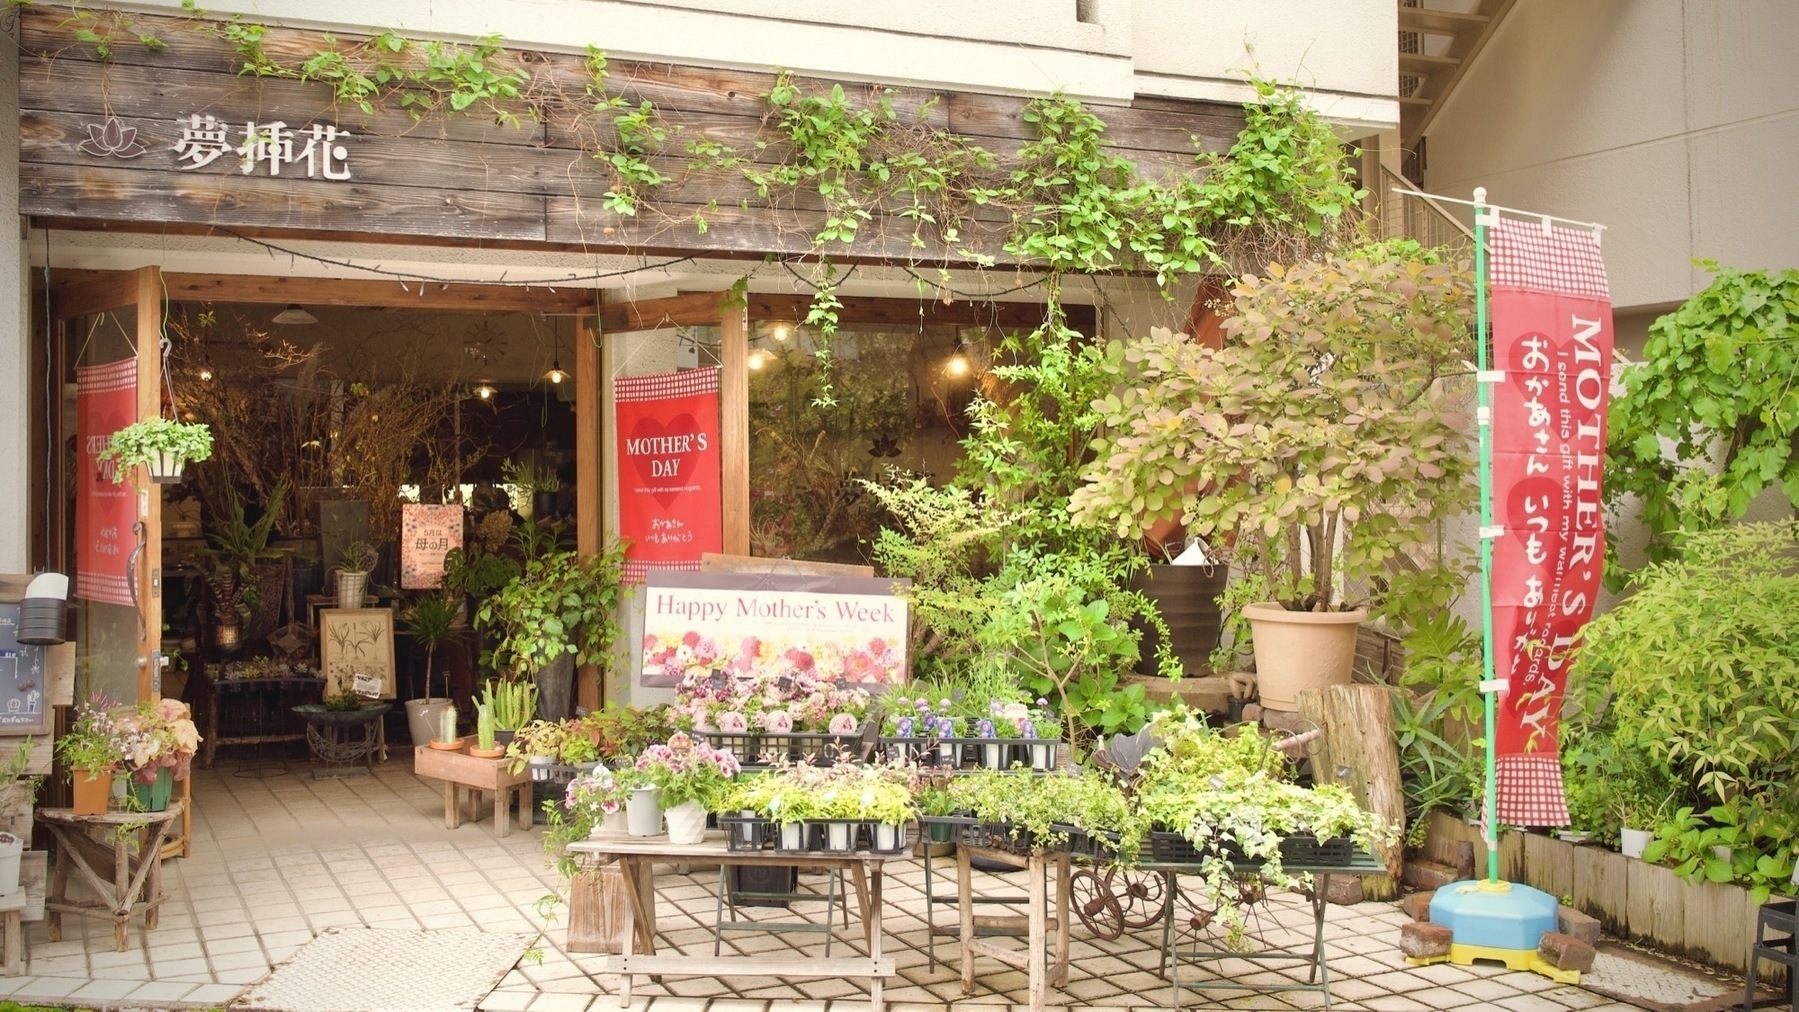 a flower shop with all sorts of green vines and leaves, contrasting with large red signs for Mother's Day